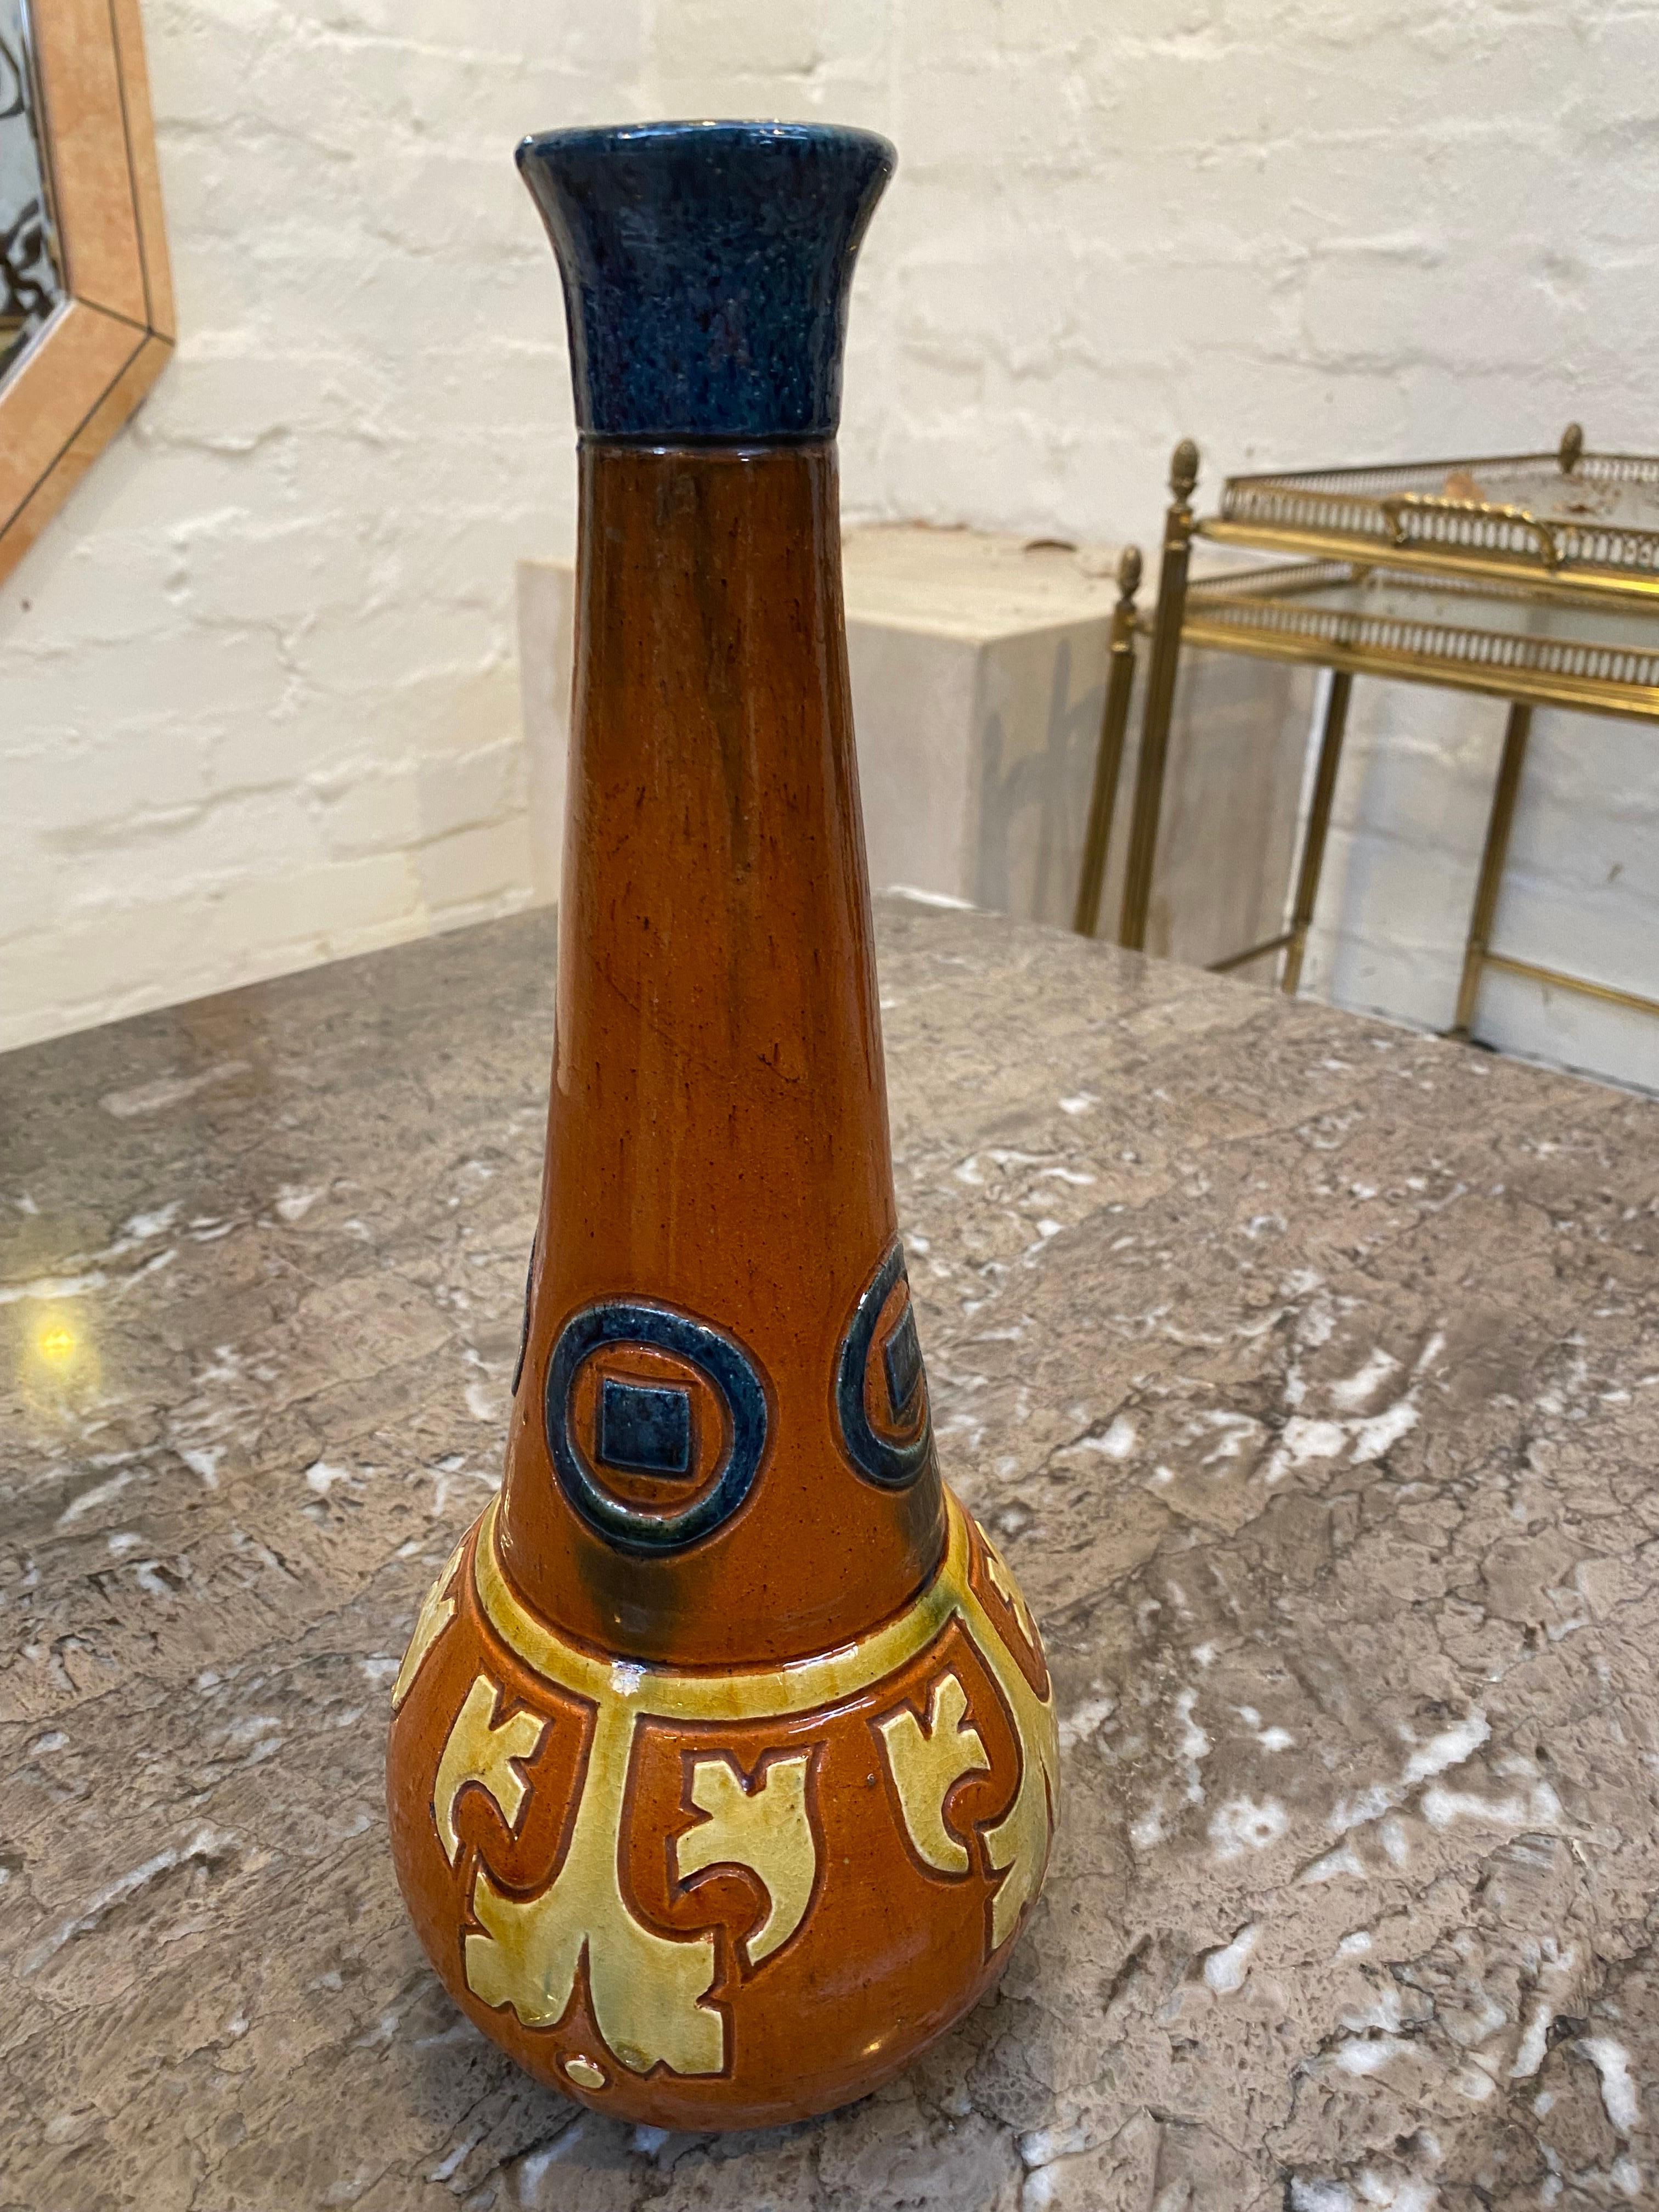 An Art Nouveau Flemish earthenware vase from Torhout, dating to the early 1900s. The simple, attractive shape and incised design are typical of the Flemish pottery or 'Poterie Flamande' of the region and period. A lovely design and now officially an